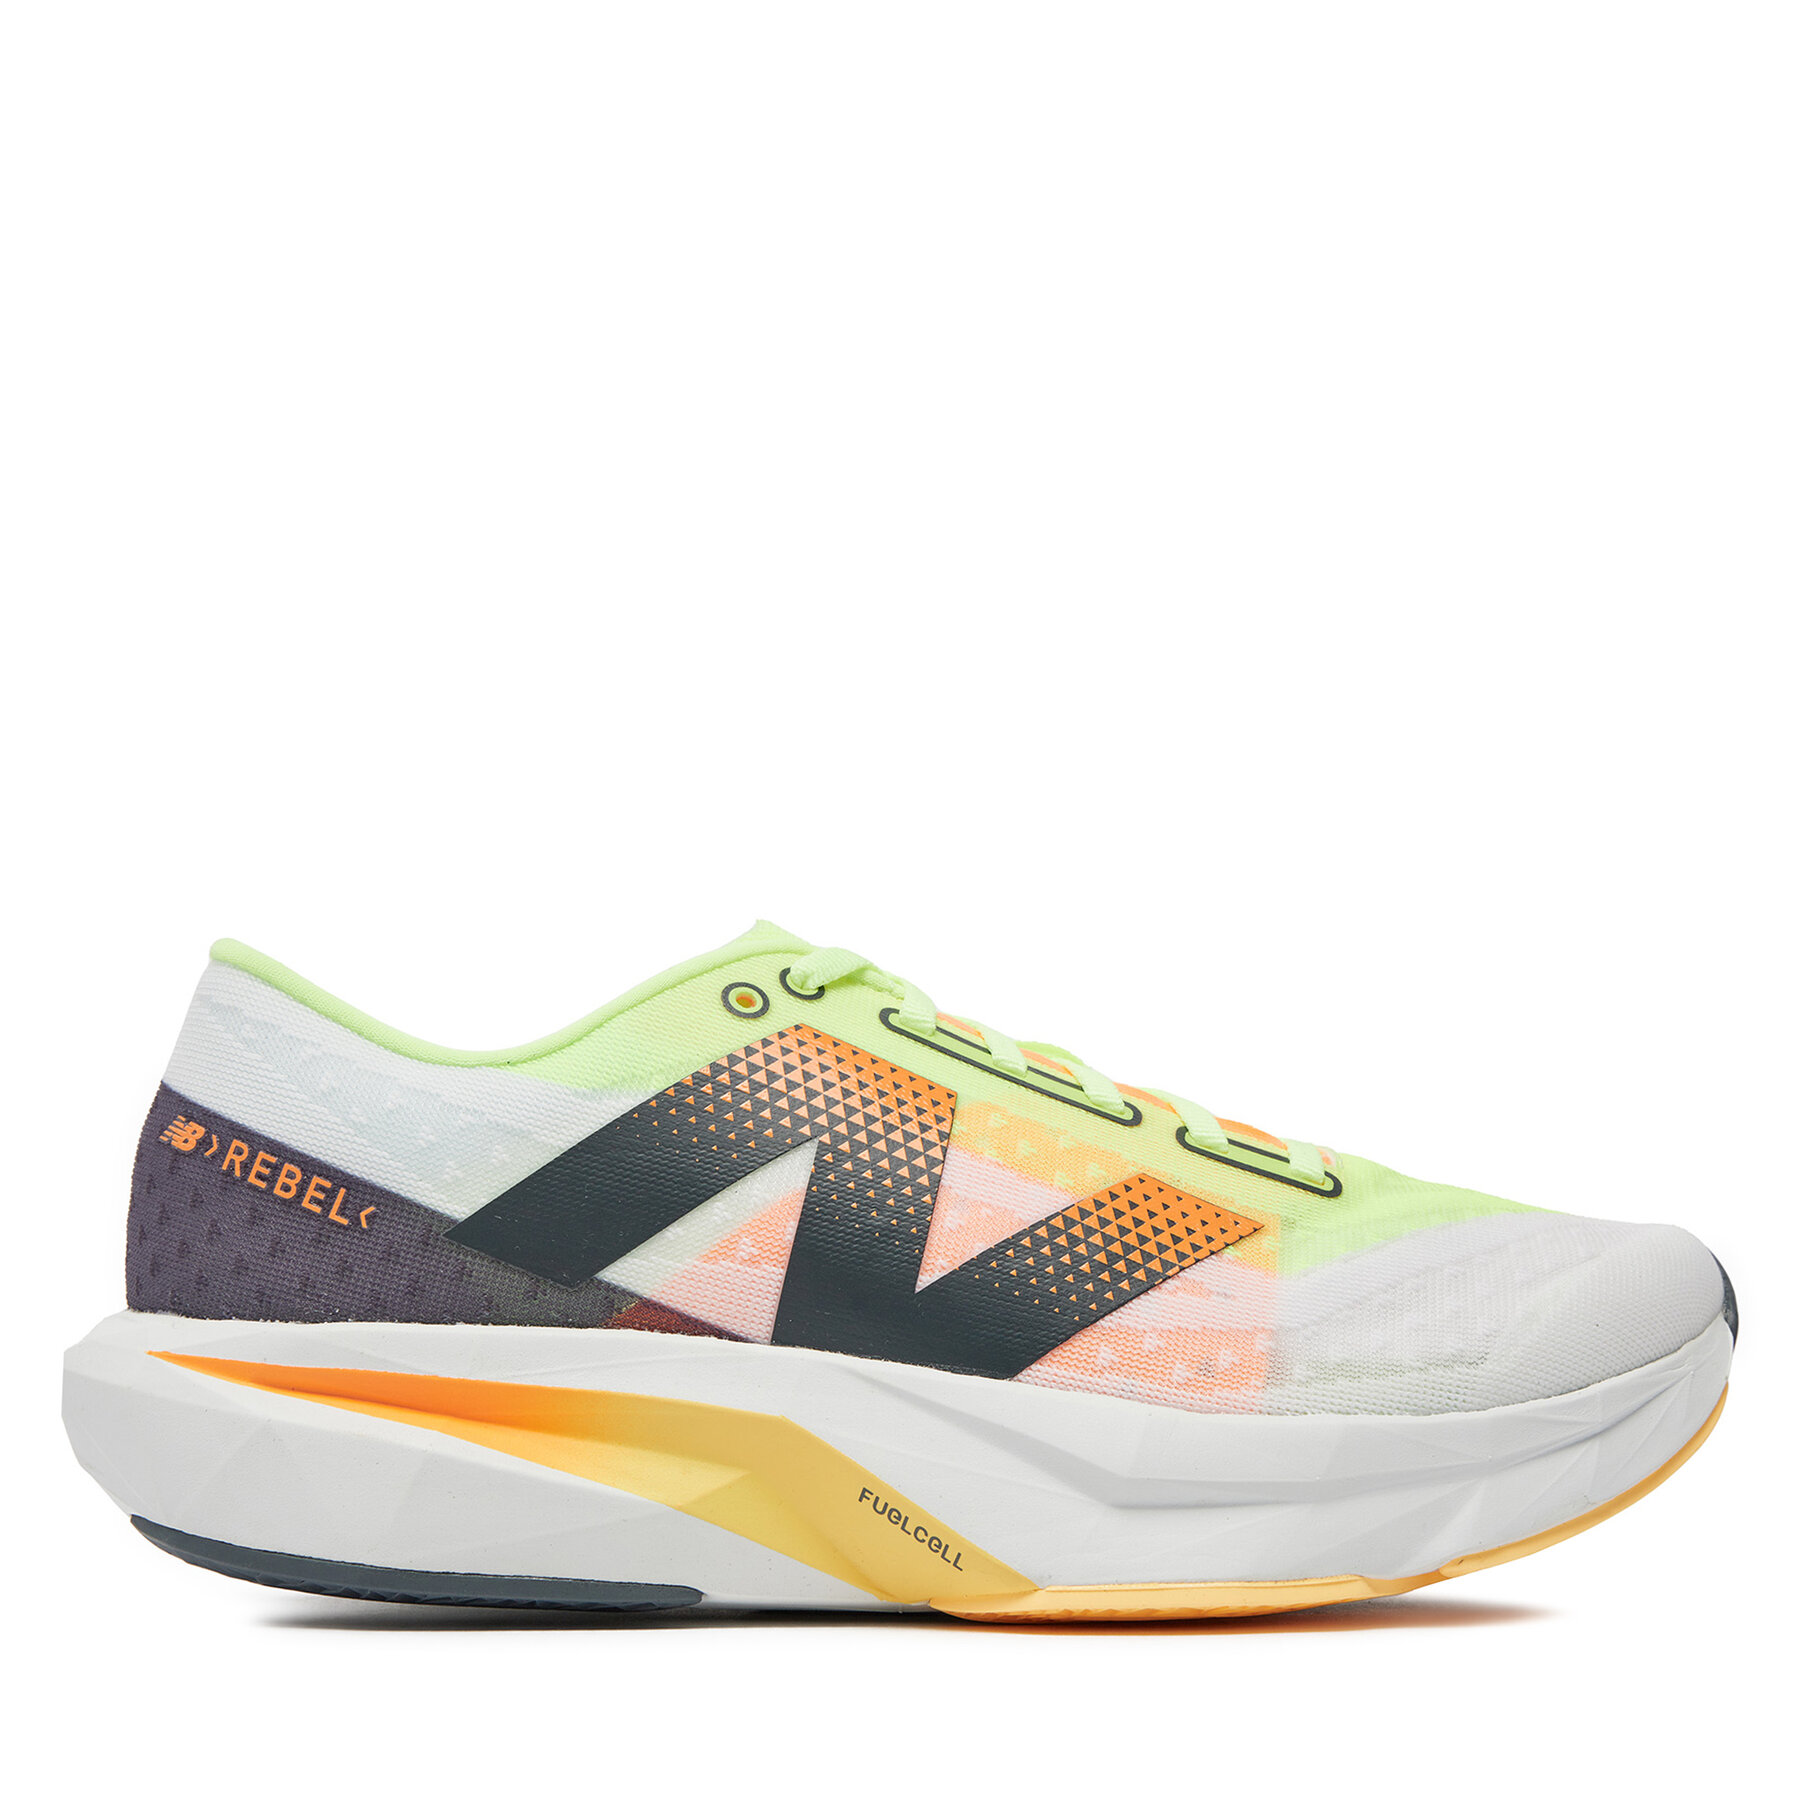 NEW BALANCE FUELCELL REBEL V4 - Zapatos